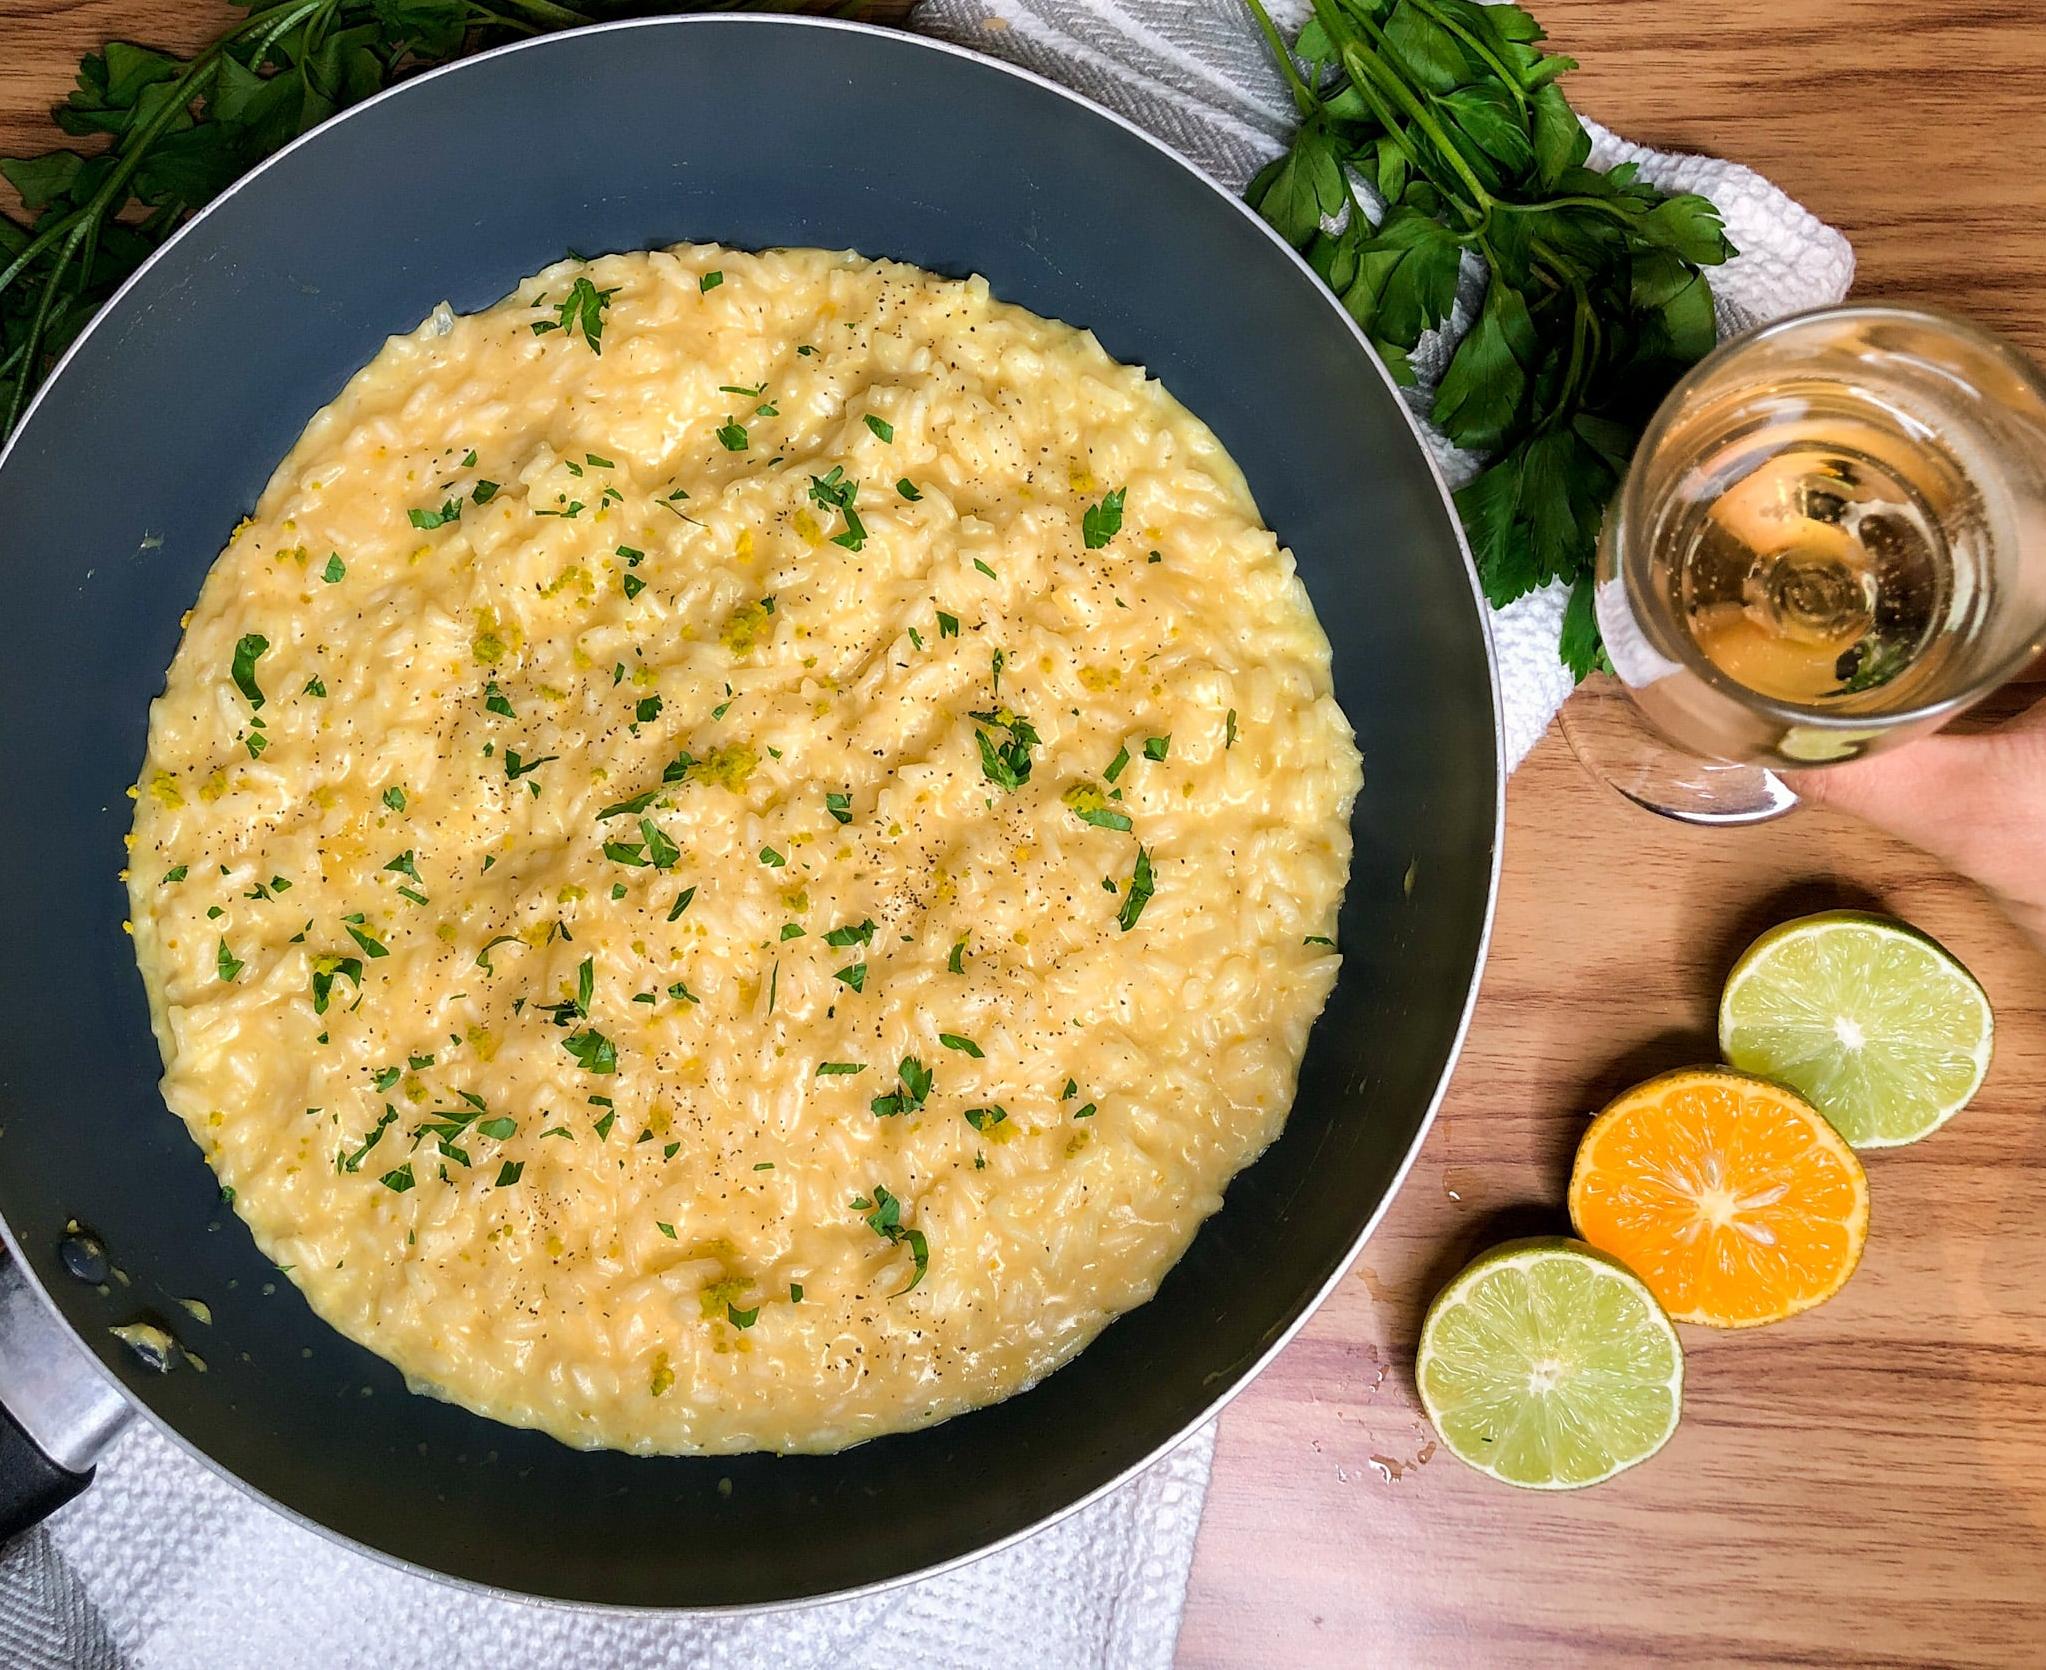  Bubbly and creamy - this risotto is a true decadence.